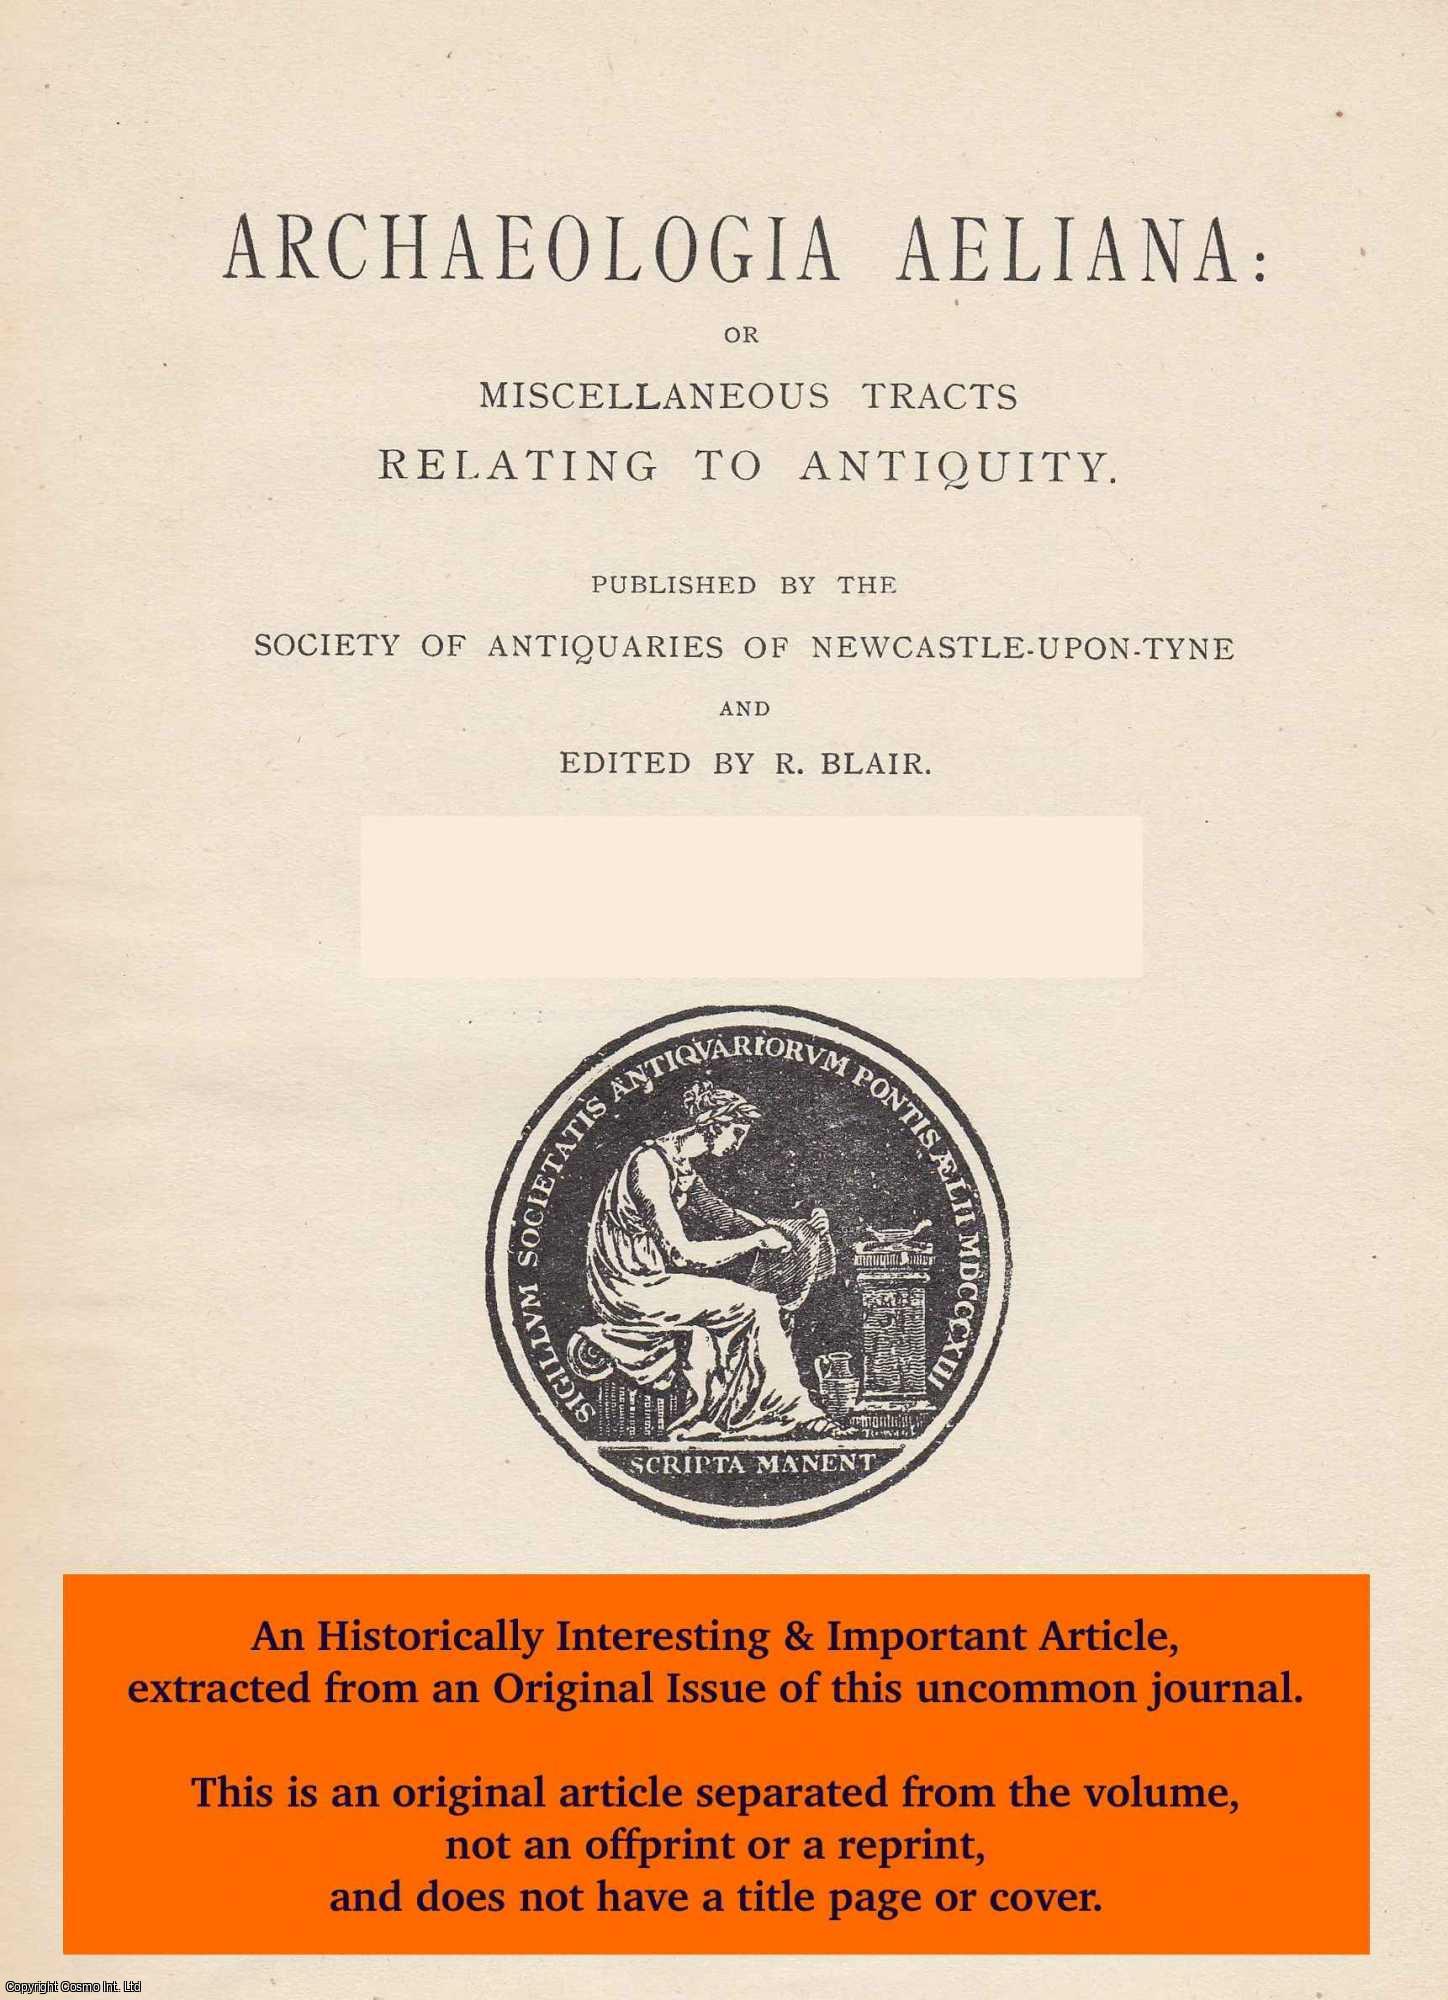 C. H. Hunter Blair, C. H. Hunter - The Sheriff's of Northumberland. Part II, 1603-1942. An original article from The Archaeologia Aeliana: or Miscellaneous Tracts Relating to Antiquity, 1943.